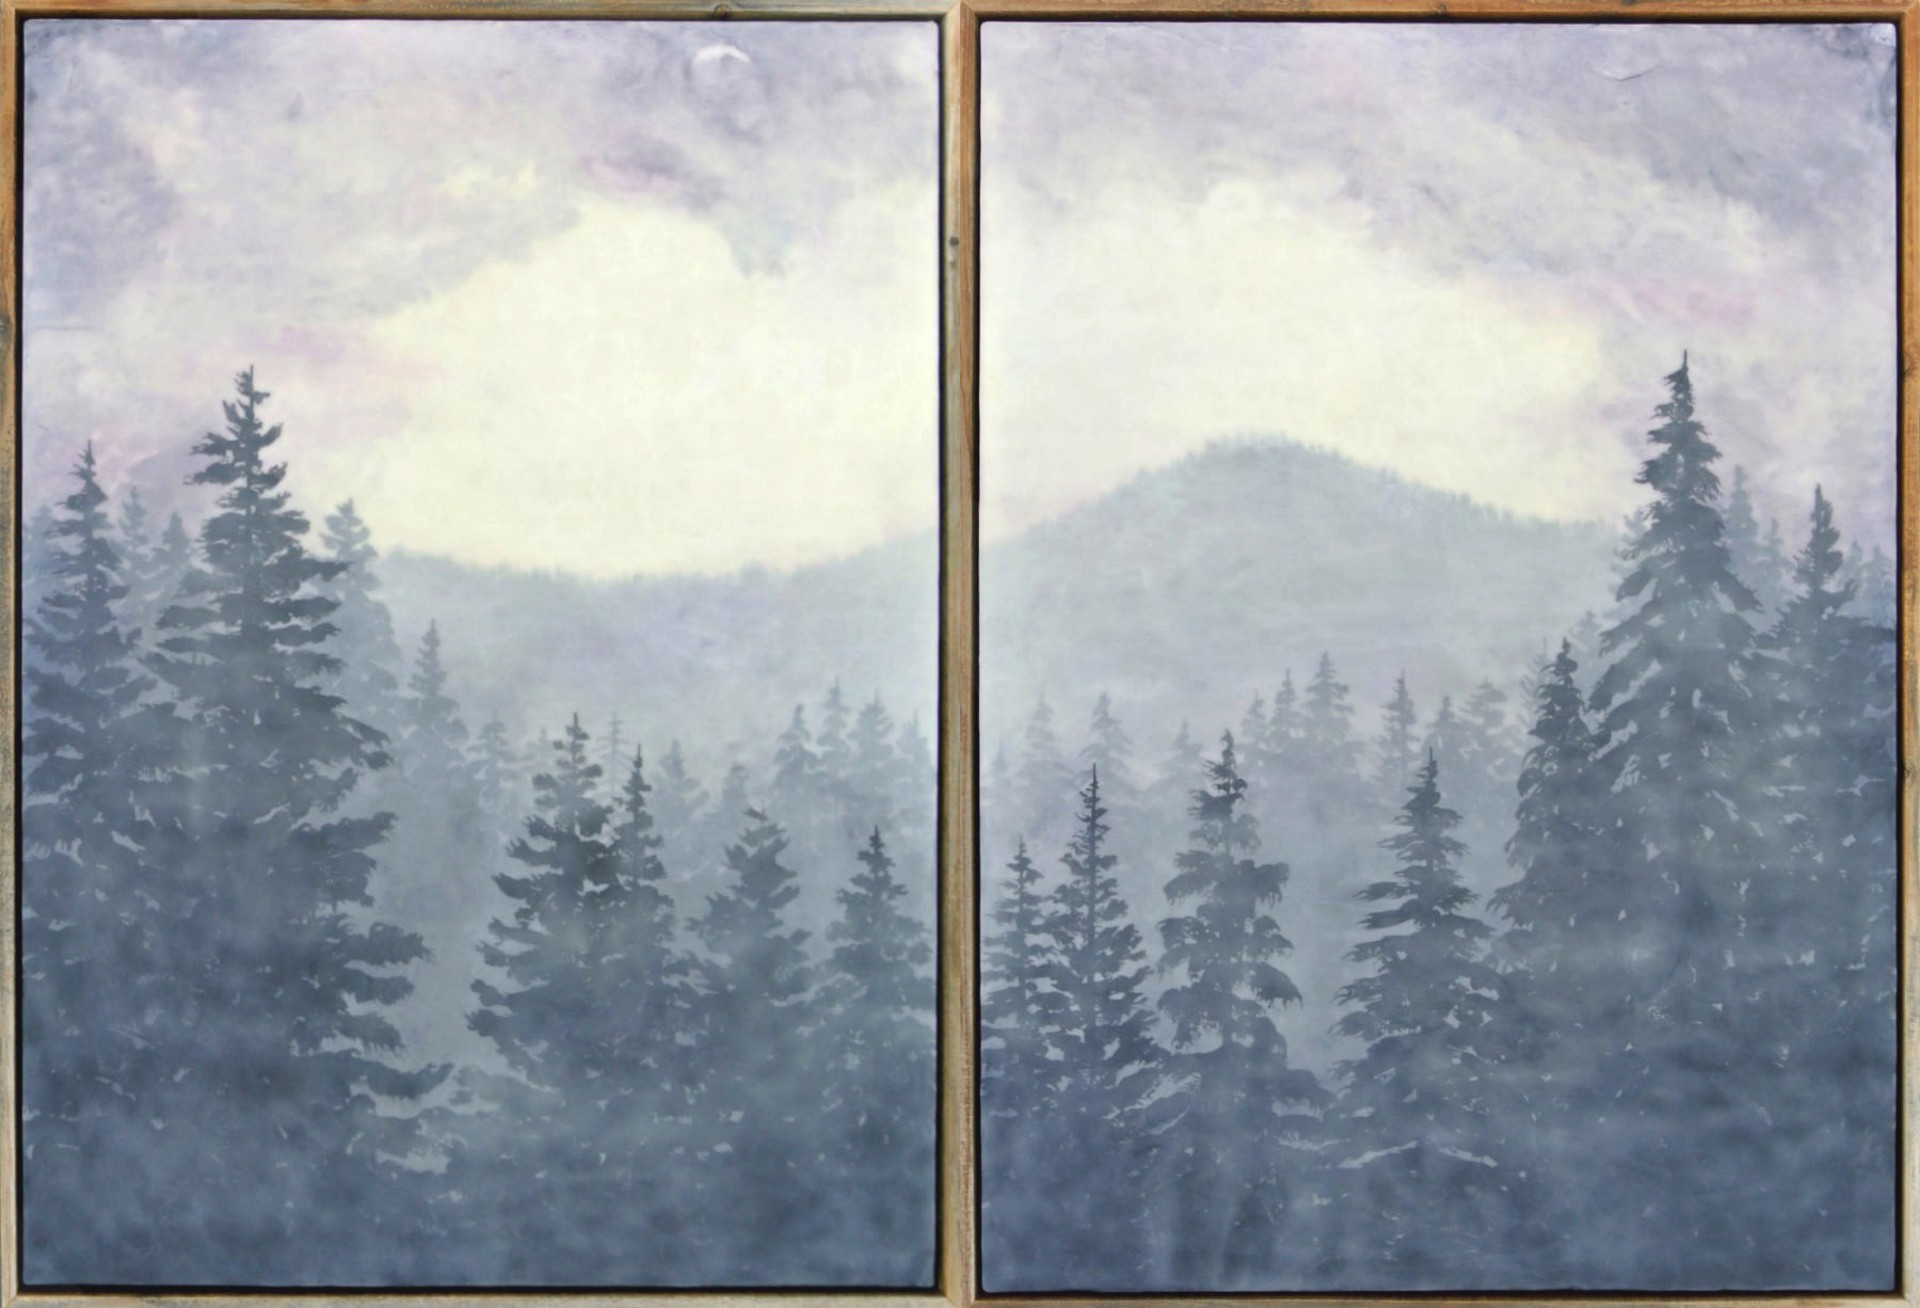 A Contemporary Painting Of Pine Trees With Hills By Bridgette Meinhold Available At Gallery Wild